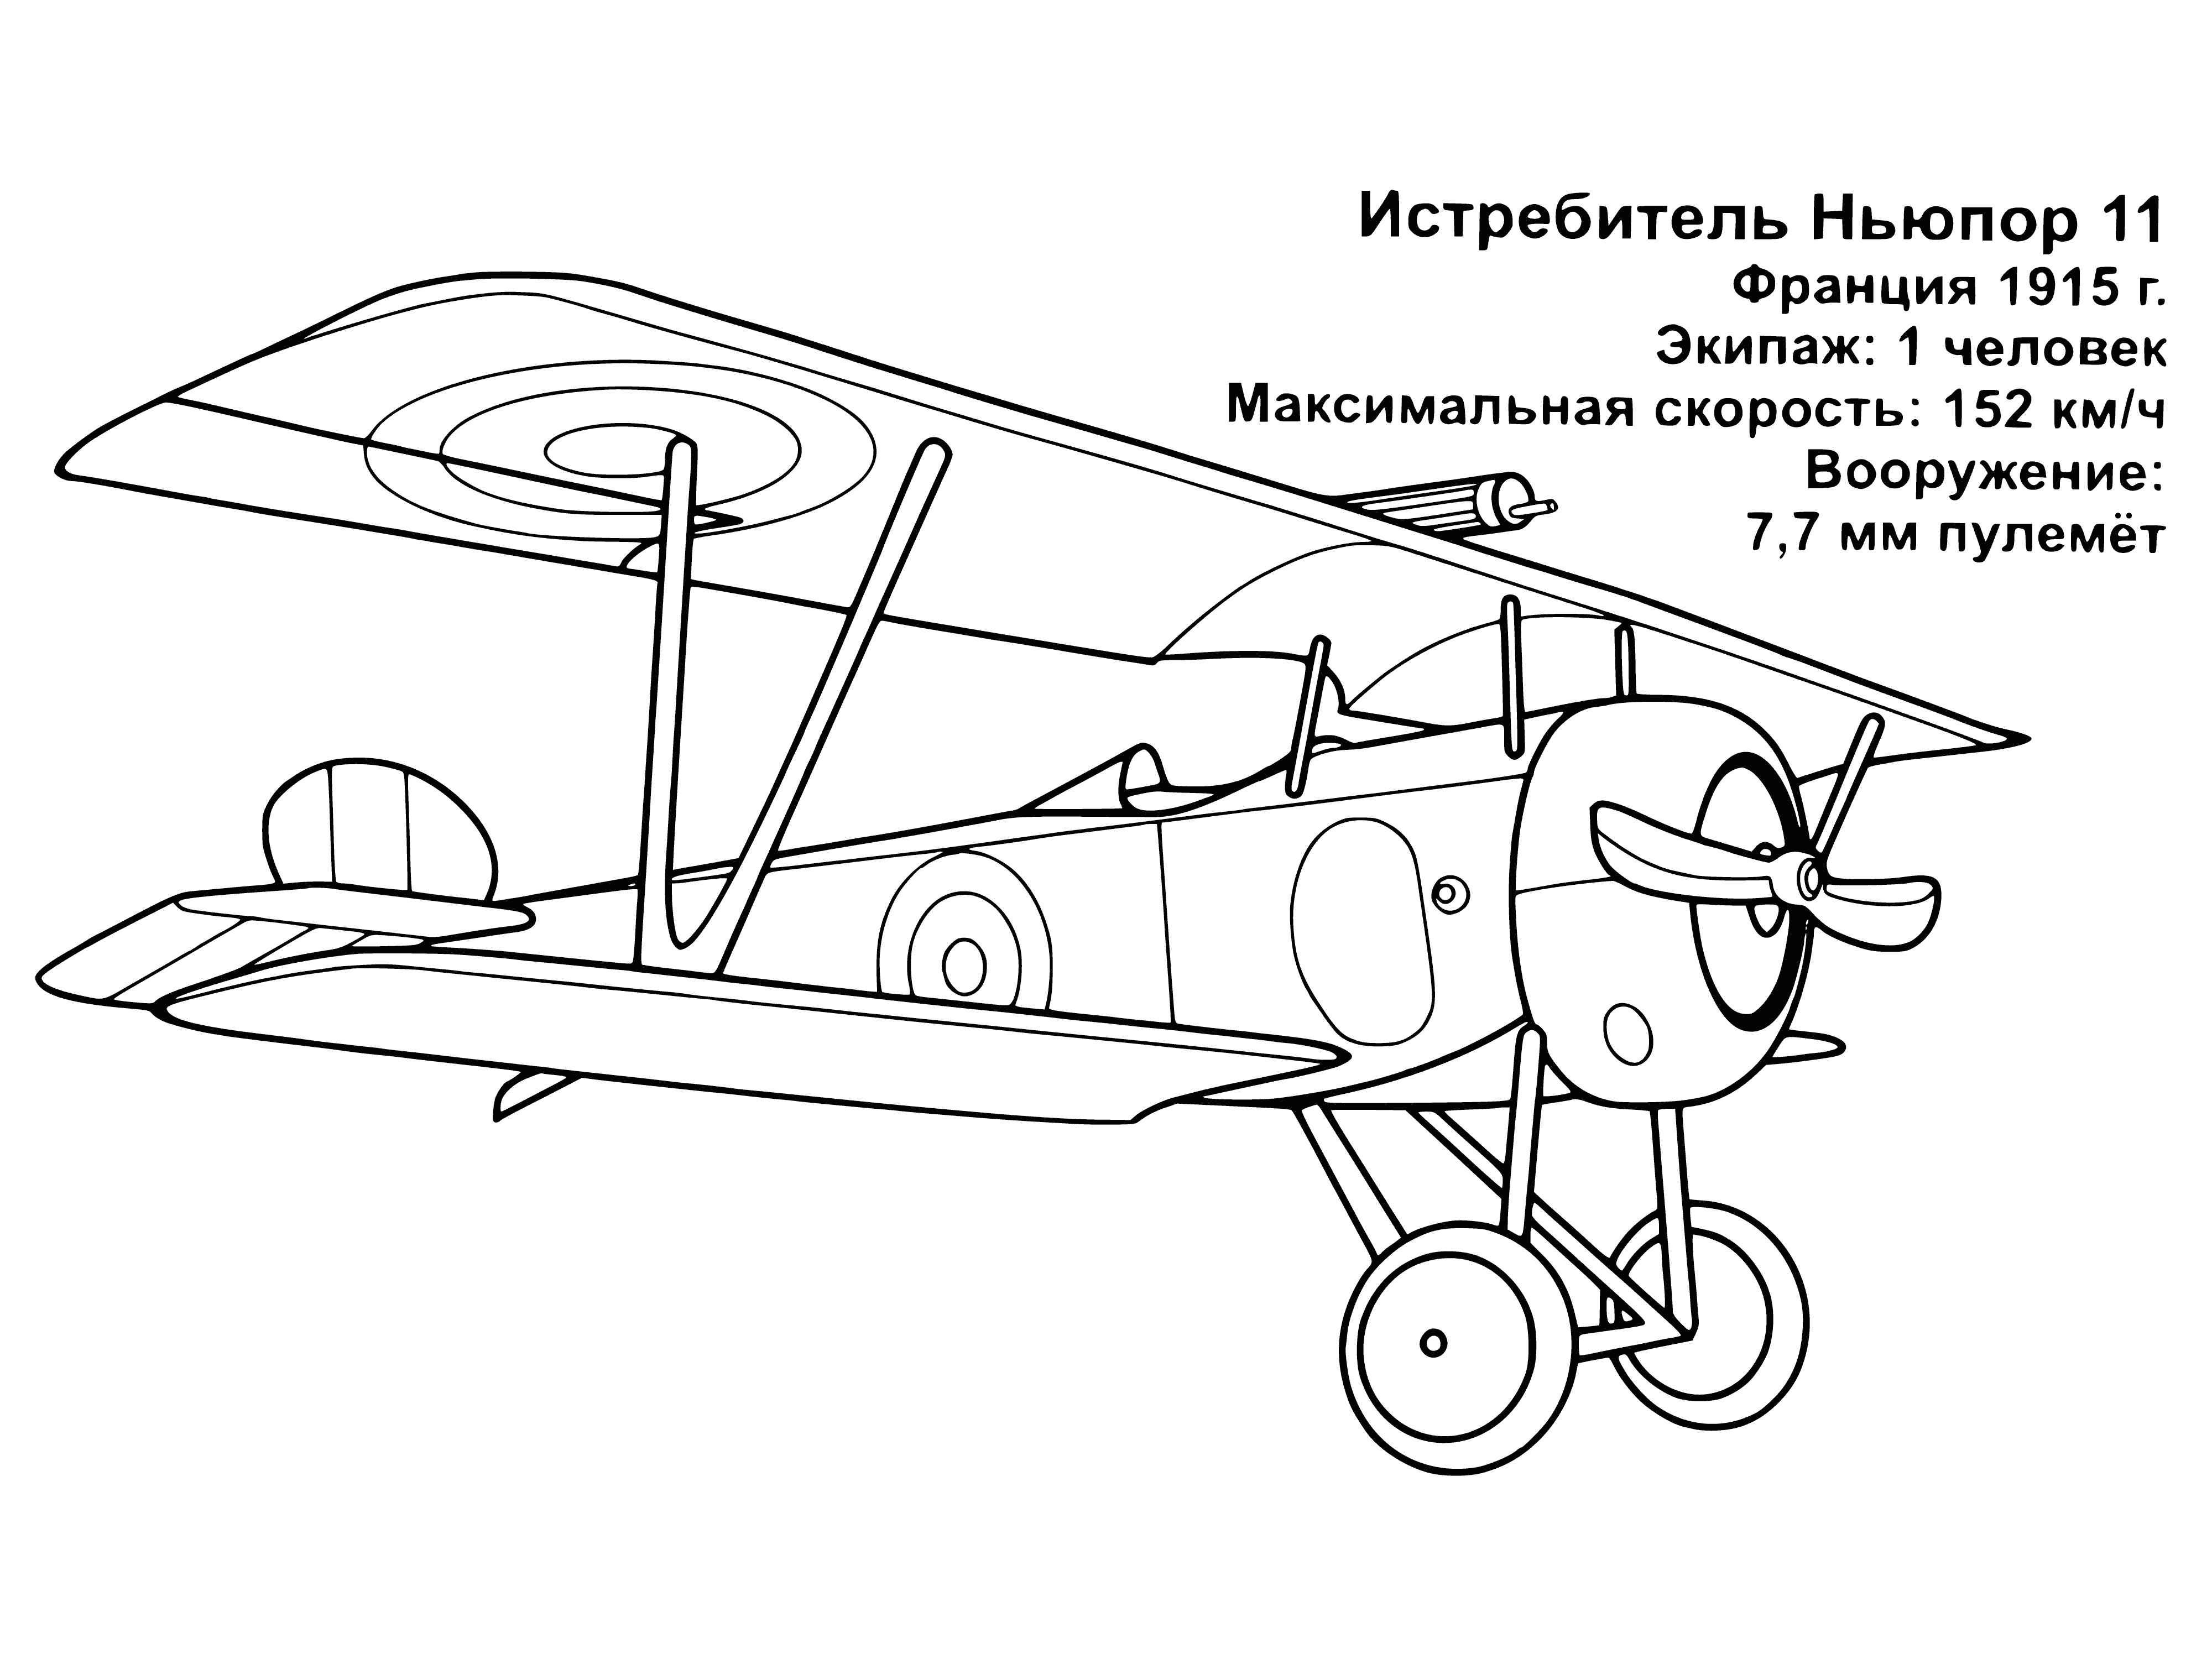 coloring page: Coloring page of a 1915 French fighter plane with single prop, wings, 2 sets of double vertical stabilizers, 2 sets of wheels, & 2 machine guns mounted at the front.